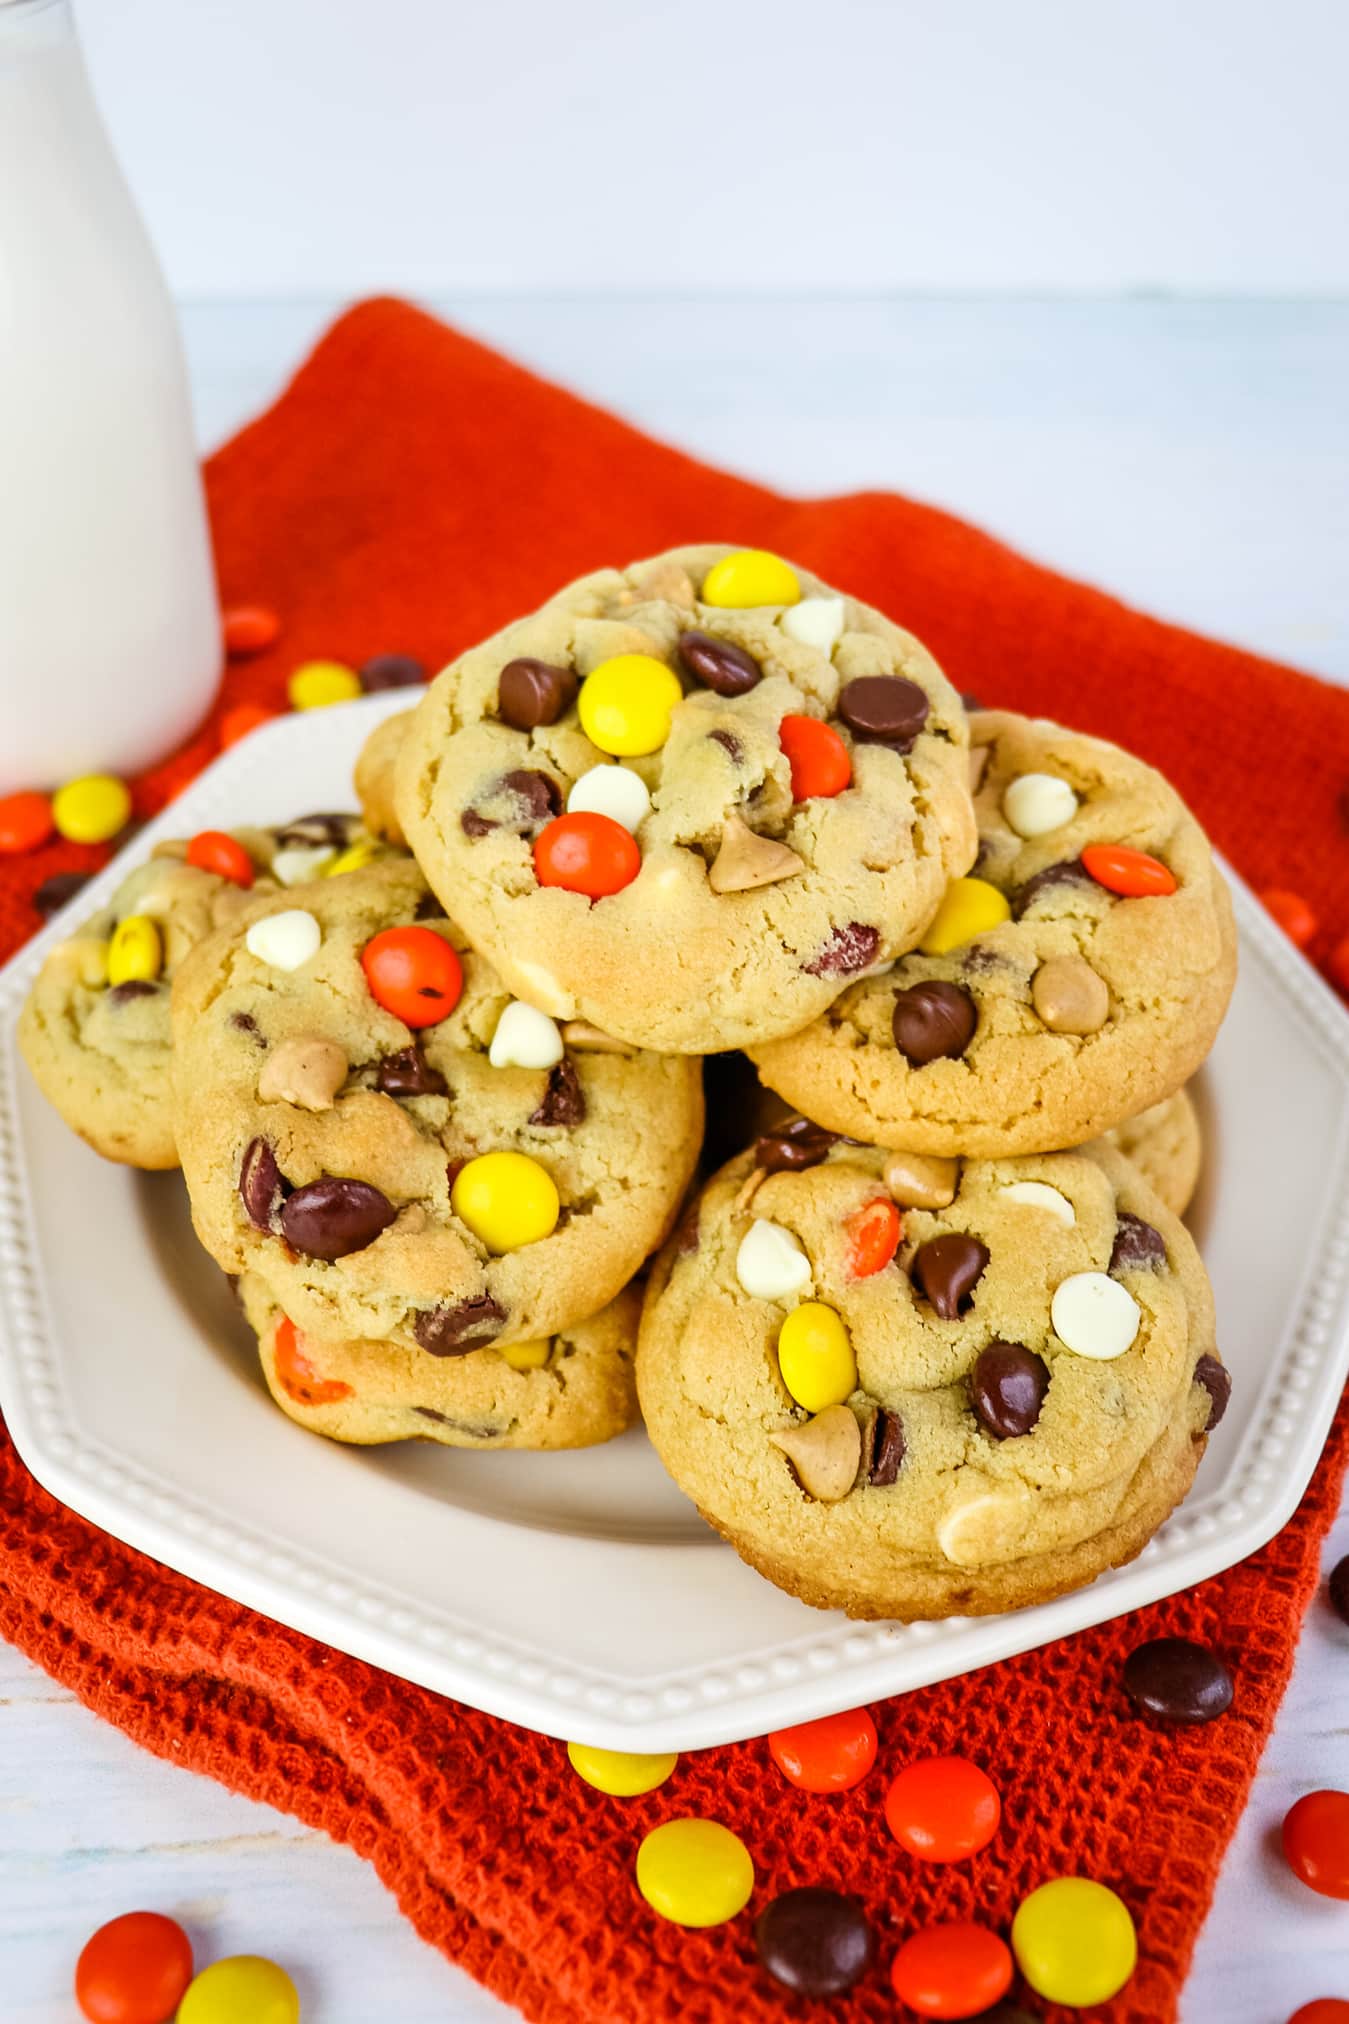 Plate of Reese's pieces cookies, garnished with Reese's pieces candies.